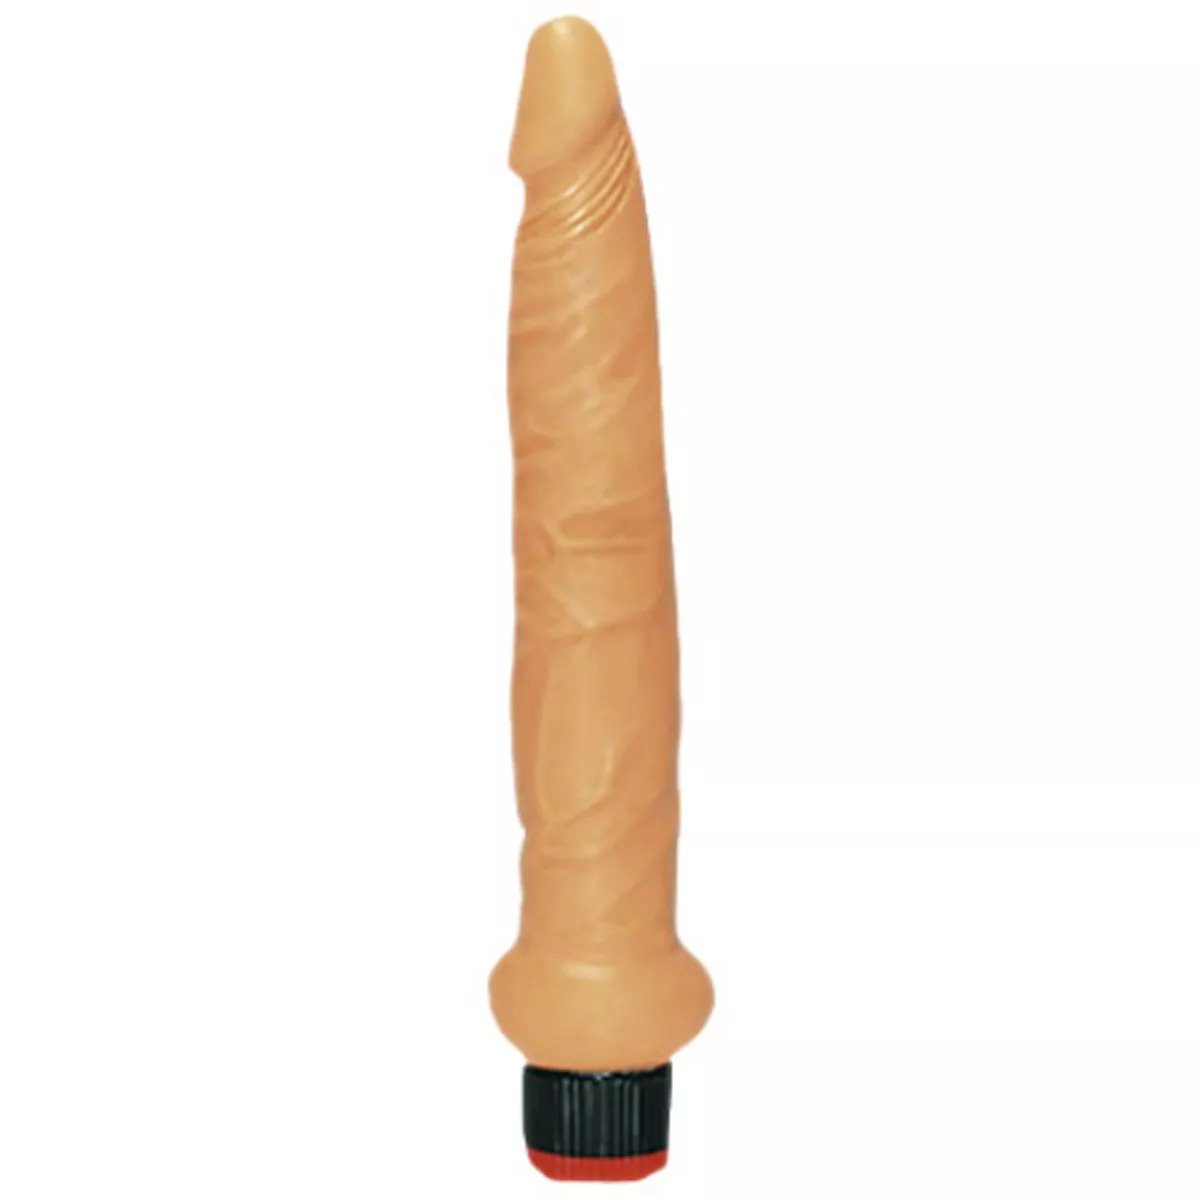 You2Toys Real Deal Anal Vibrator